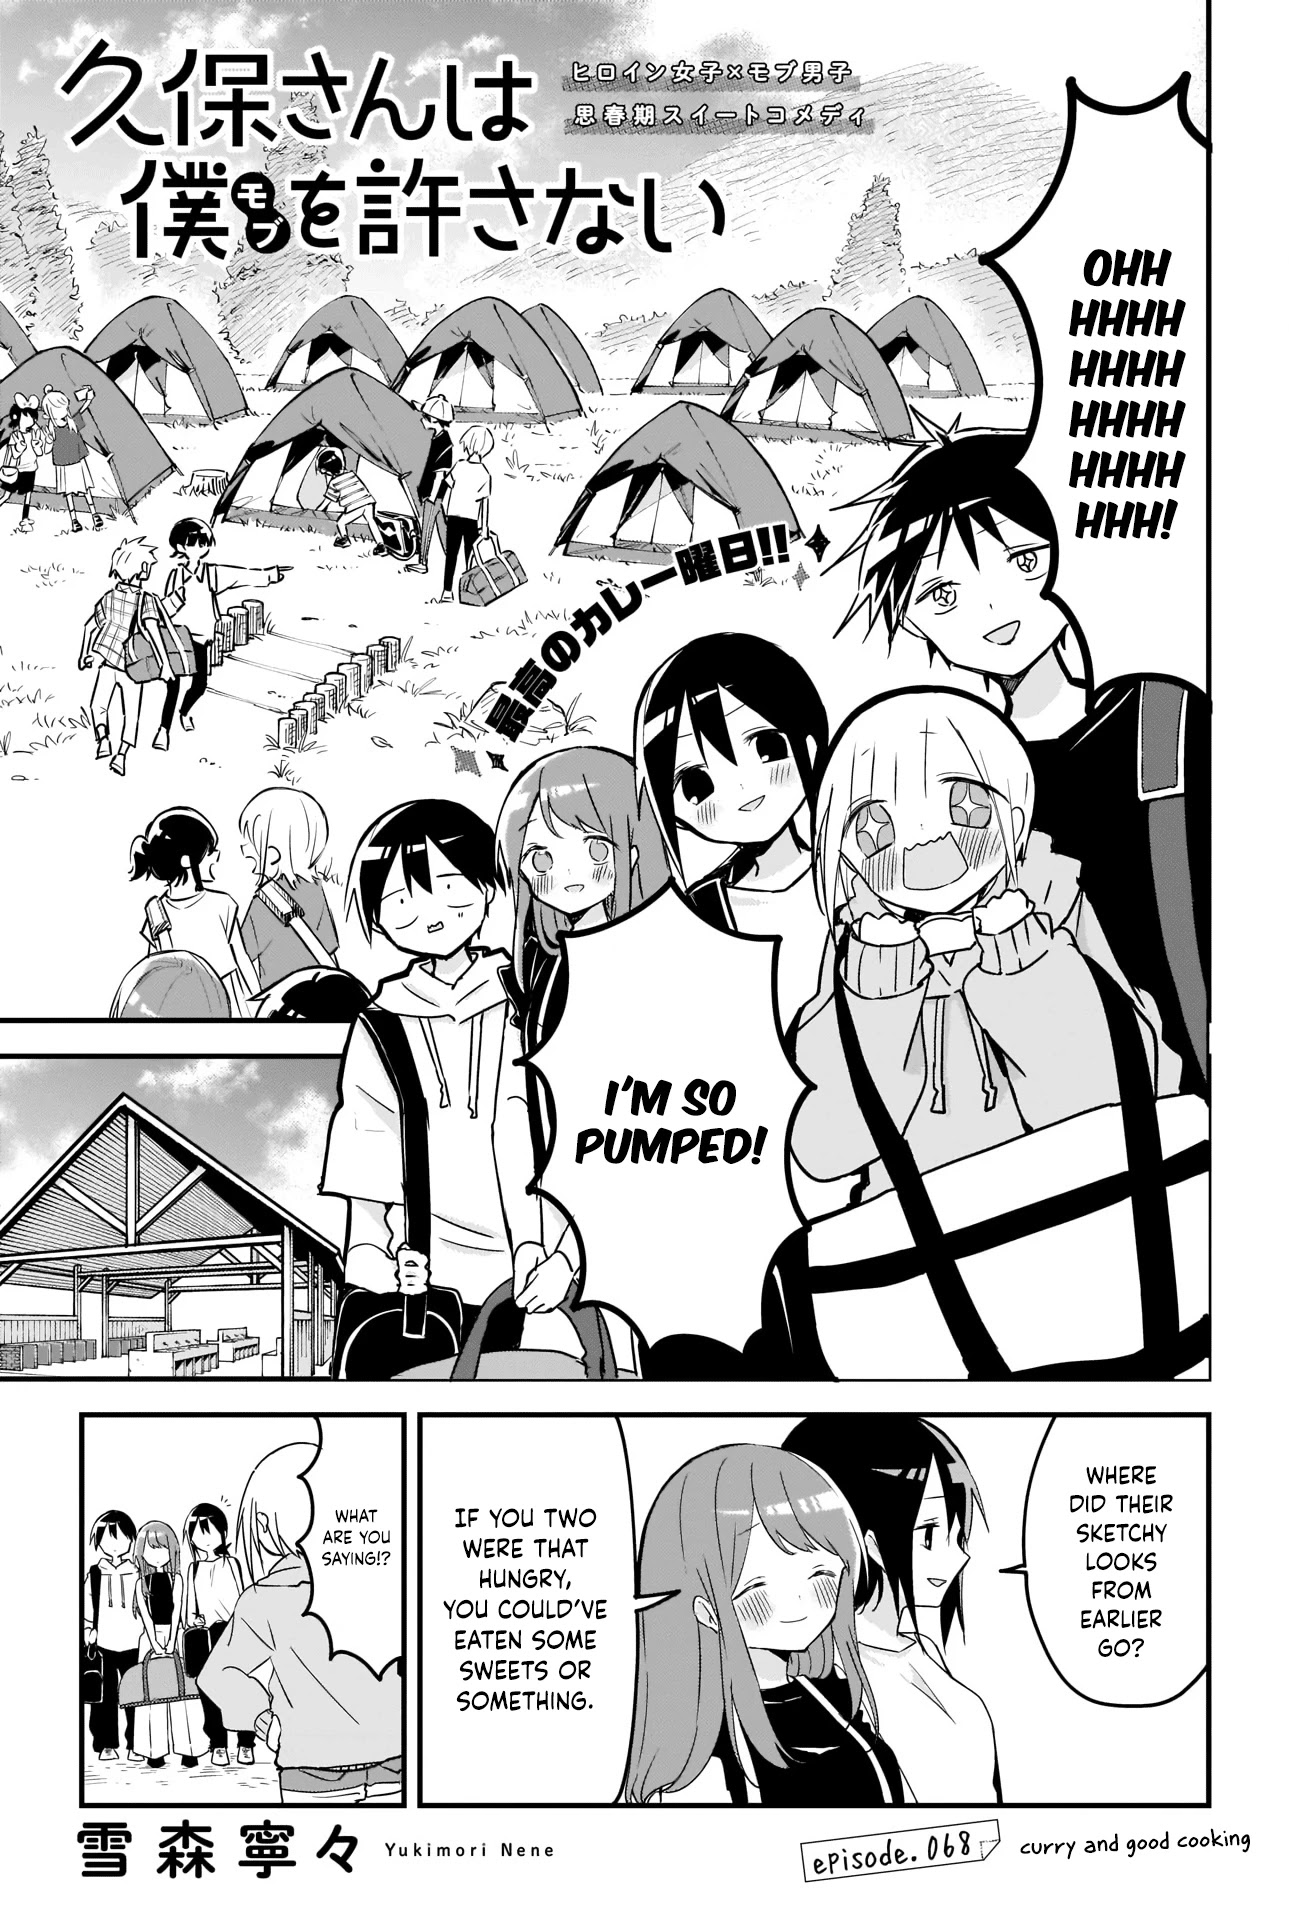 Kubo-San Doesn't Leave Me Be (A Mob) - Page 1